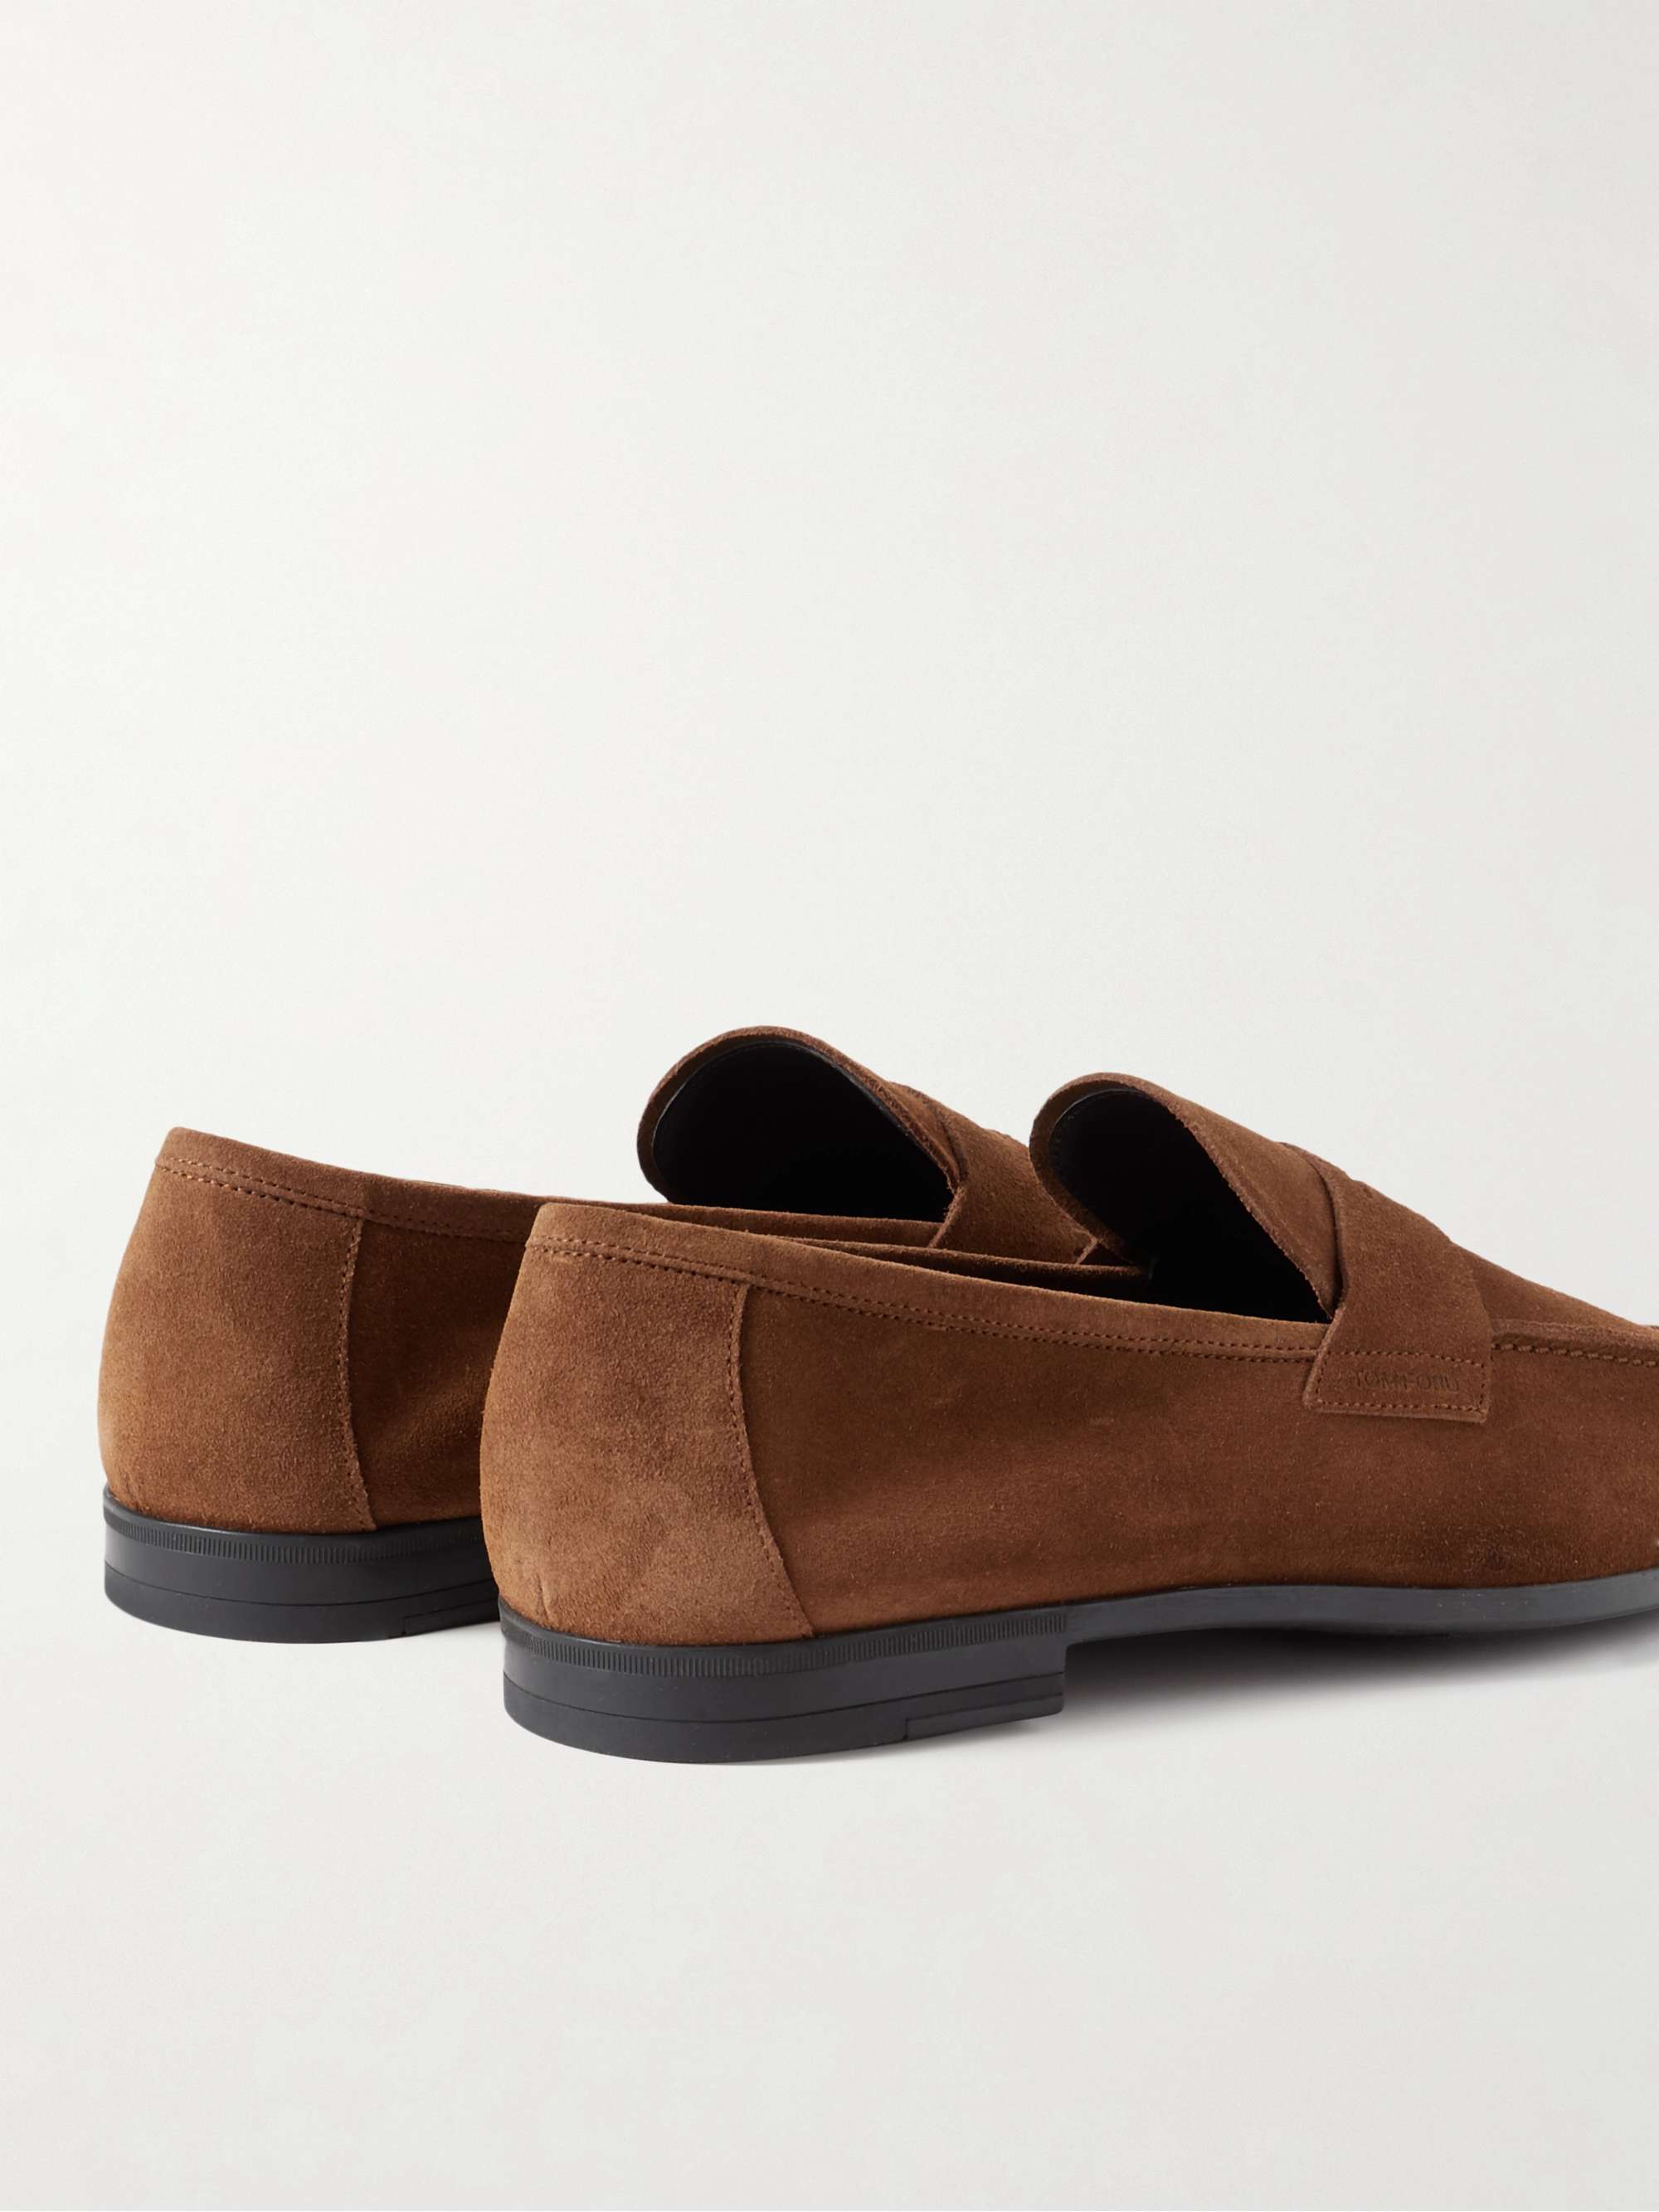 TOM FORD Sean Suede Penny Loafers